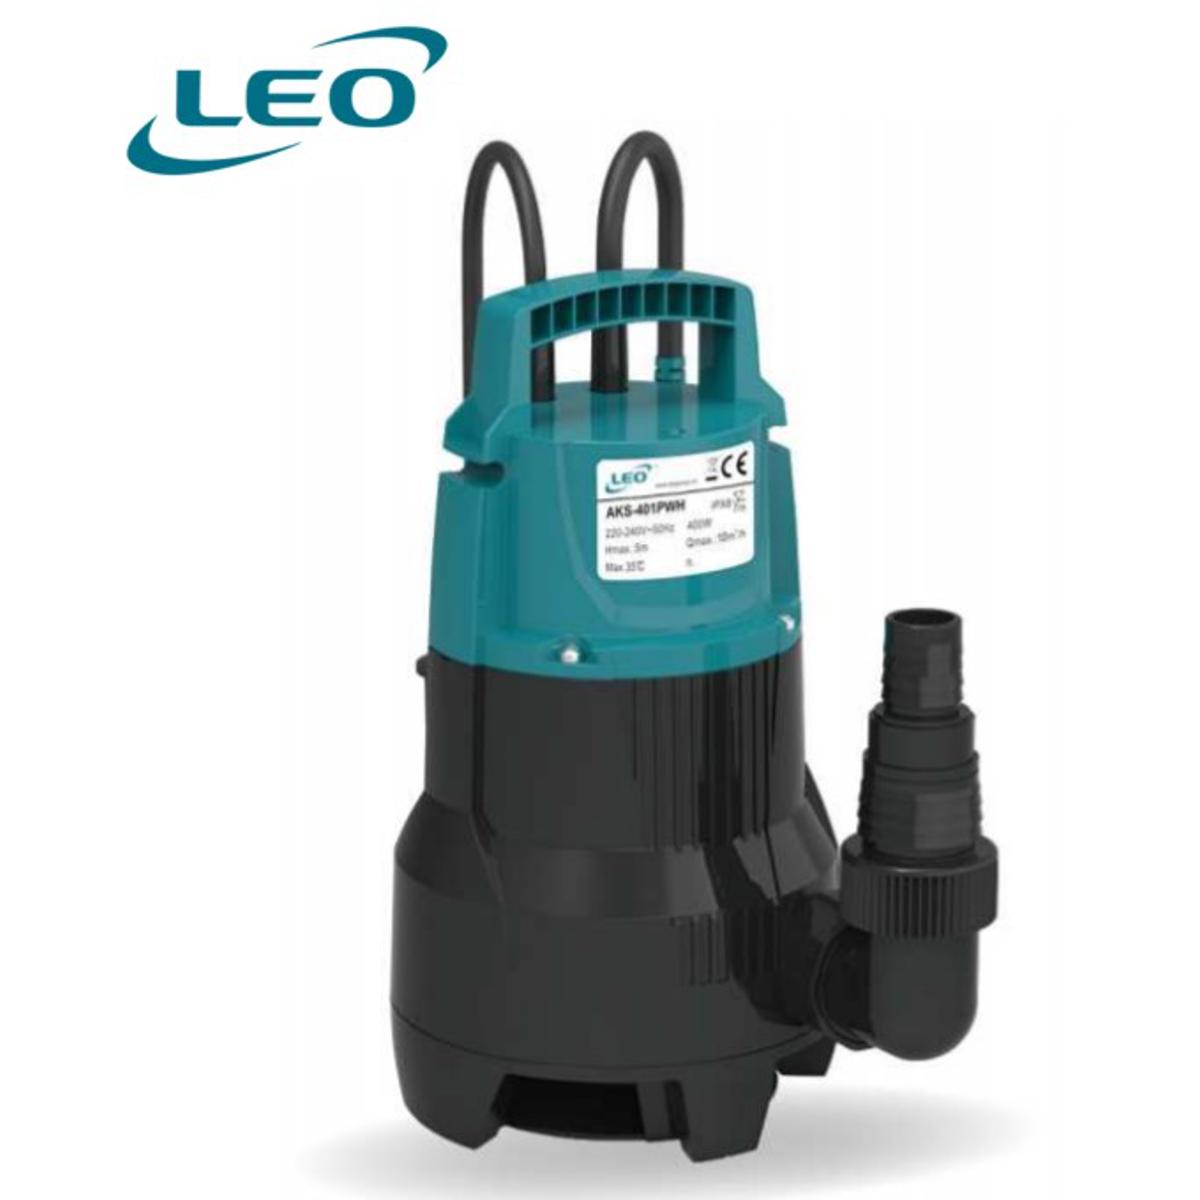 LEO - AKS-751PWH - 750 W - 1 HP  Rust Free ENGINEERED PLASTIC DIRTY Water Submersible Pump With FLOAT SWITCH FOR AUTOMATIC OPERATION - EUROPEON STANDARD Water Pump